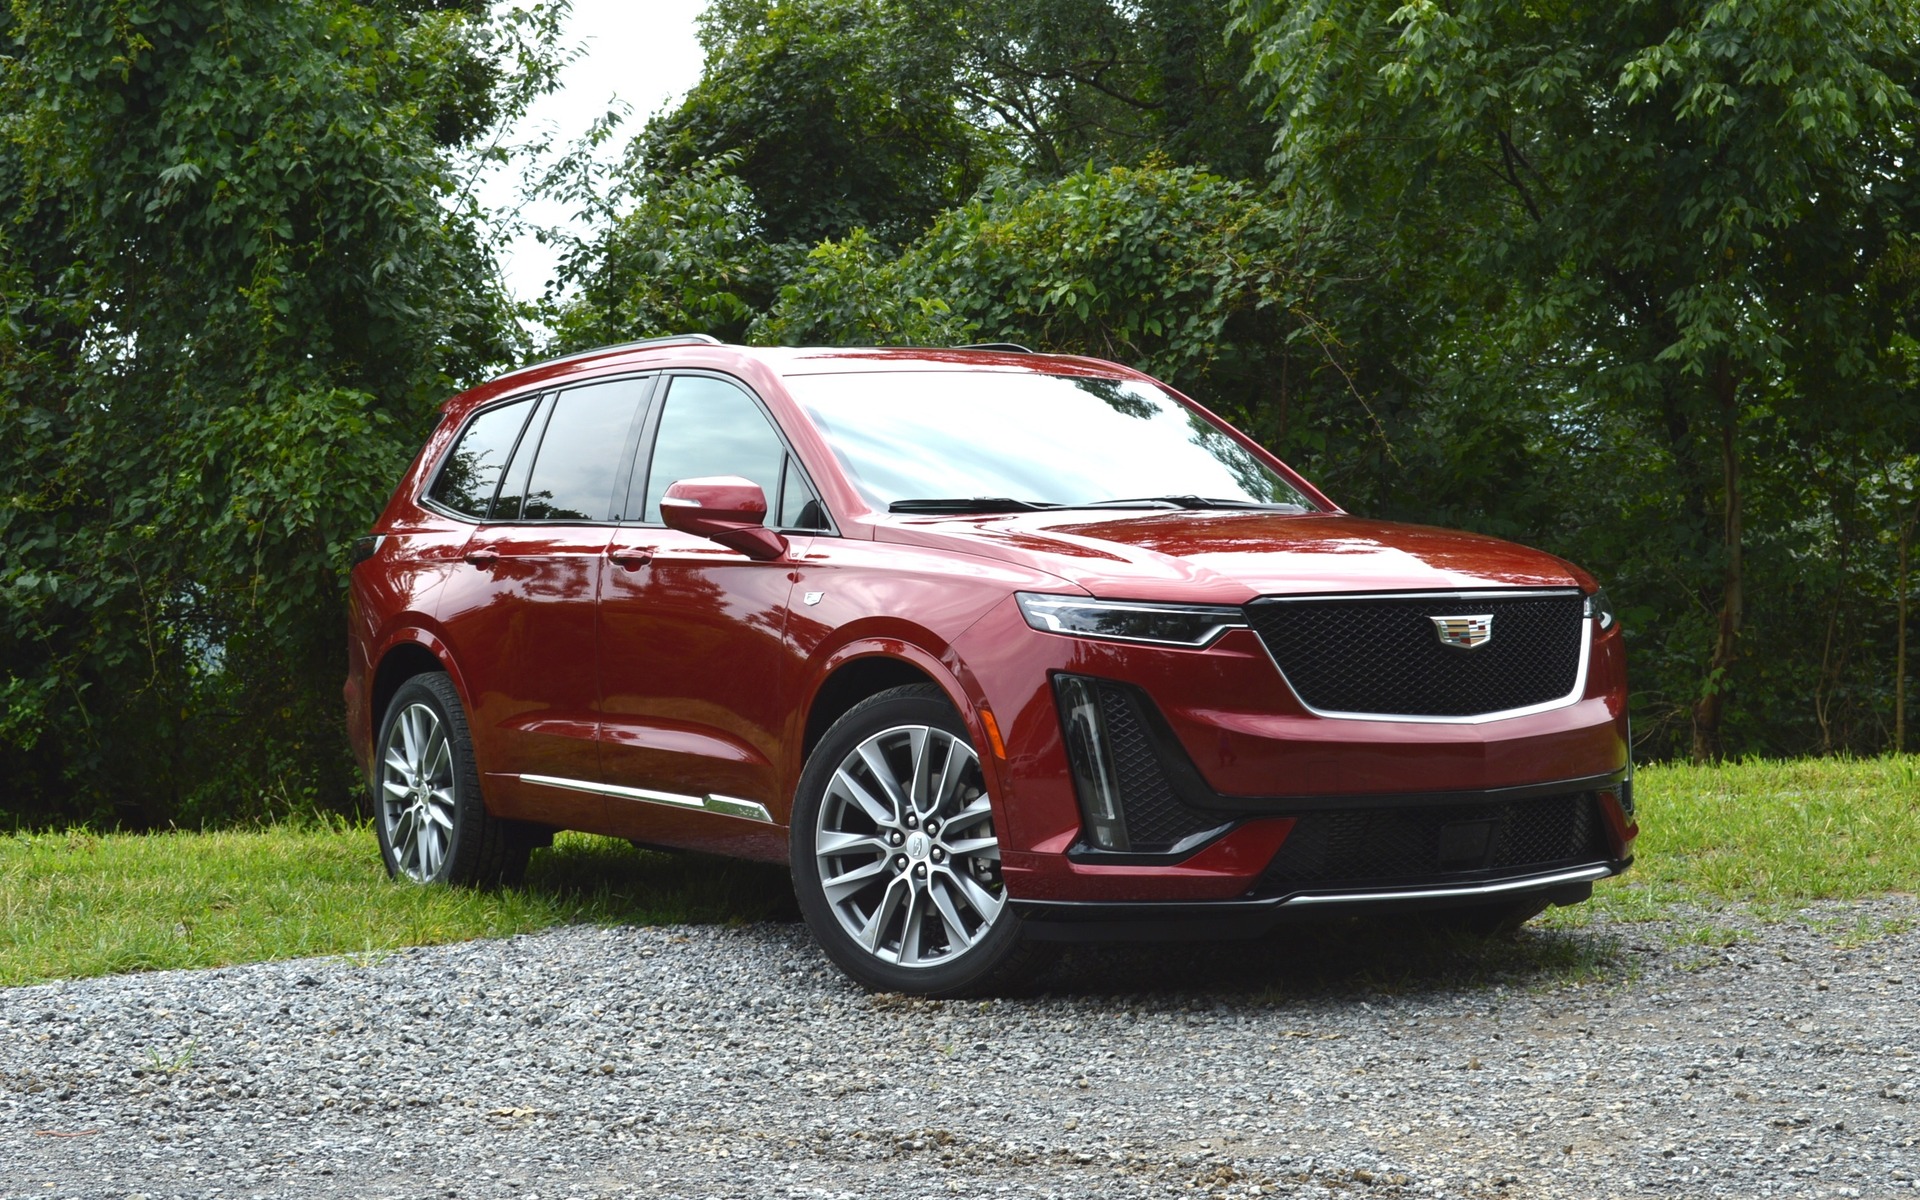 2020 Cadillac XT6: Not Enough Frosting - The Car Guide